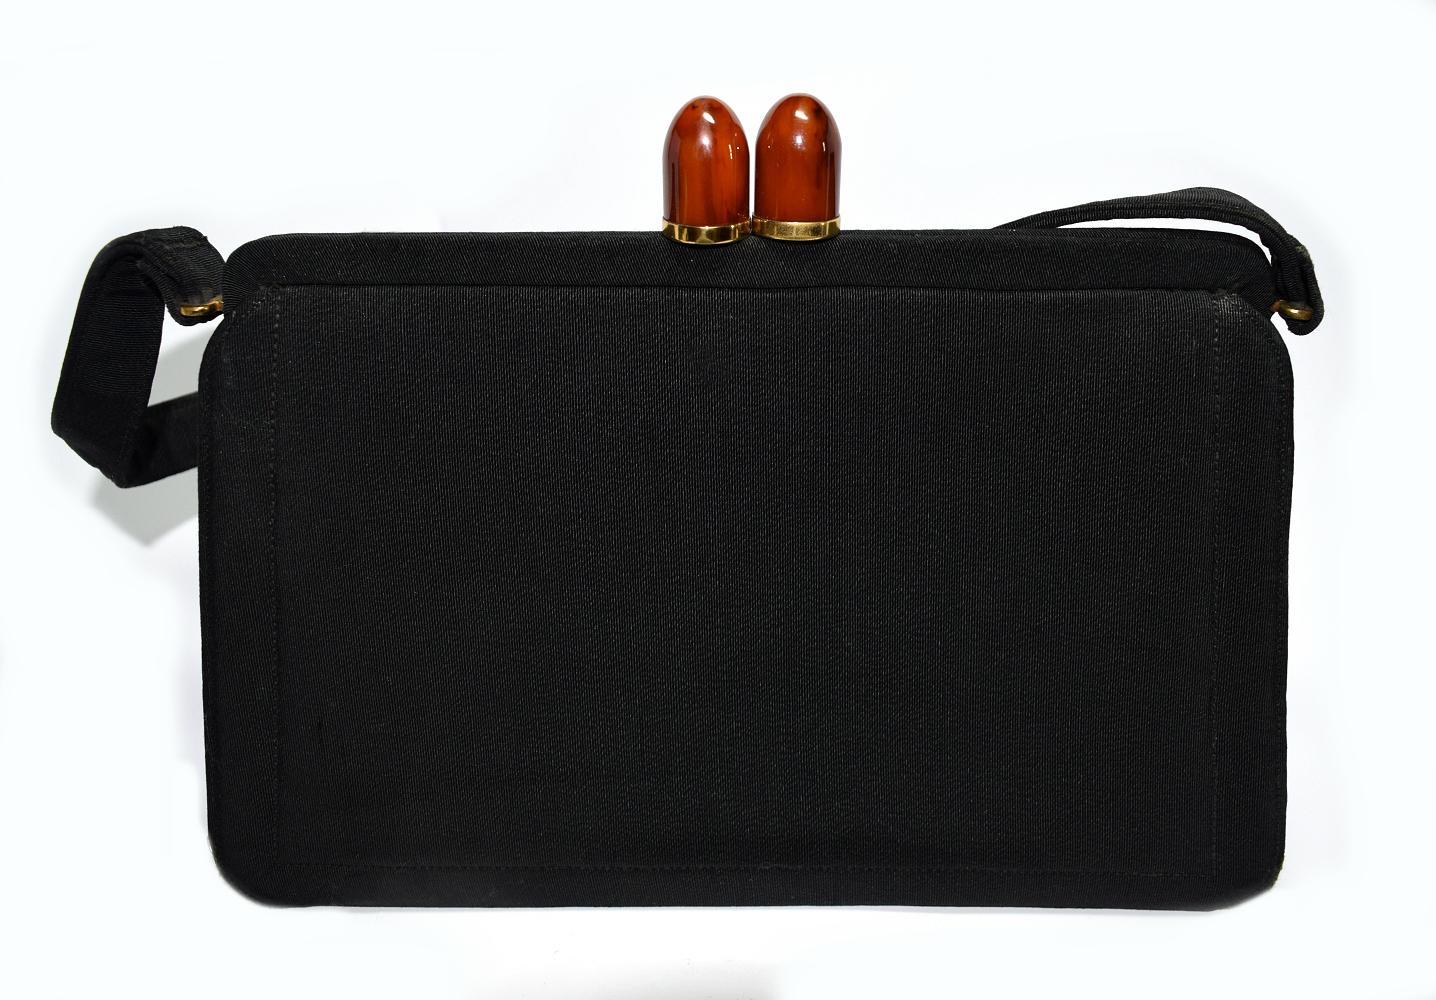 This wonderful vintage handbag was made in the 1930s-1940s for Saks Fifth Avenue in New York. The body of the bag is constructed from black grosgrain, while the kiss lock closure features a cherry red Bakelite hardware with gold-tone accents. There